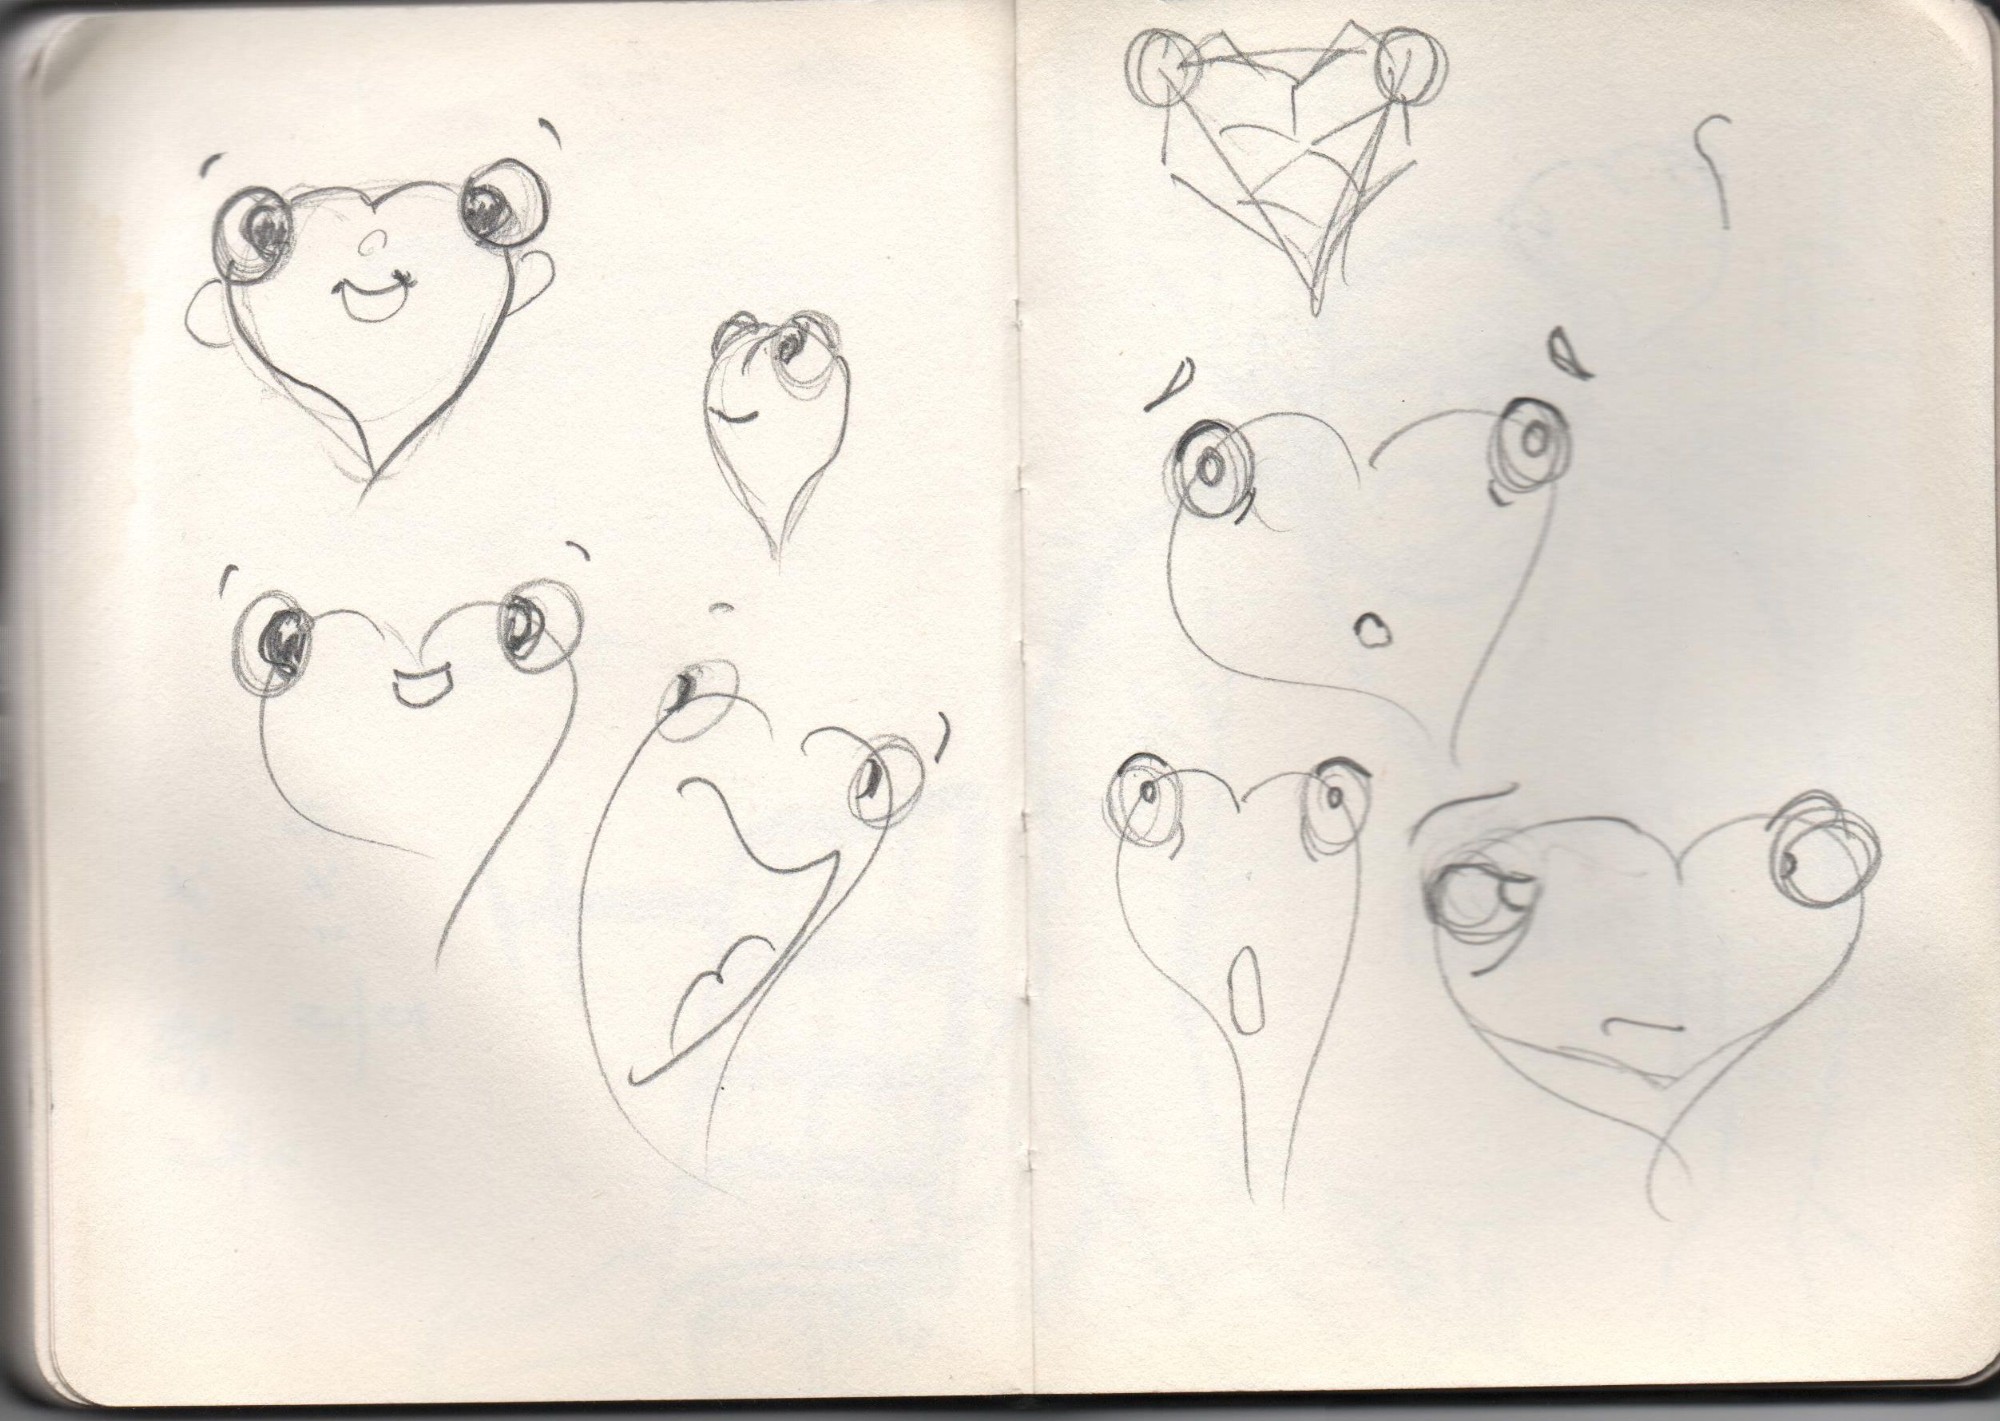 Sketchbook, the very first concept sketches